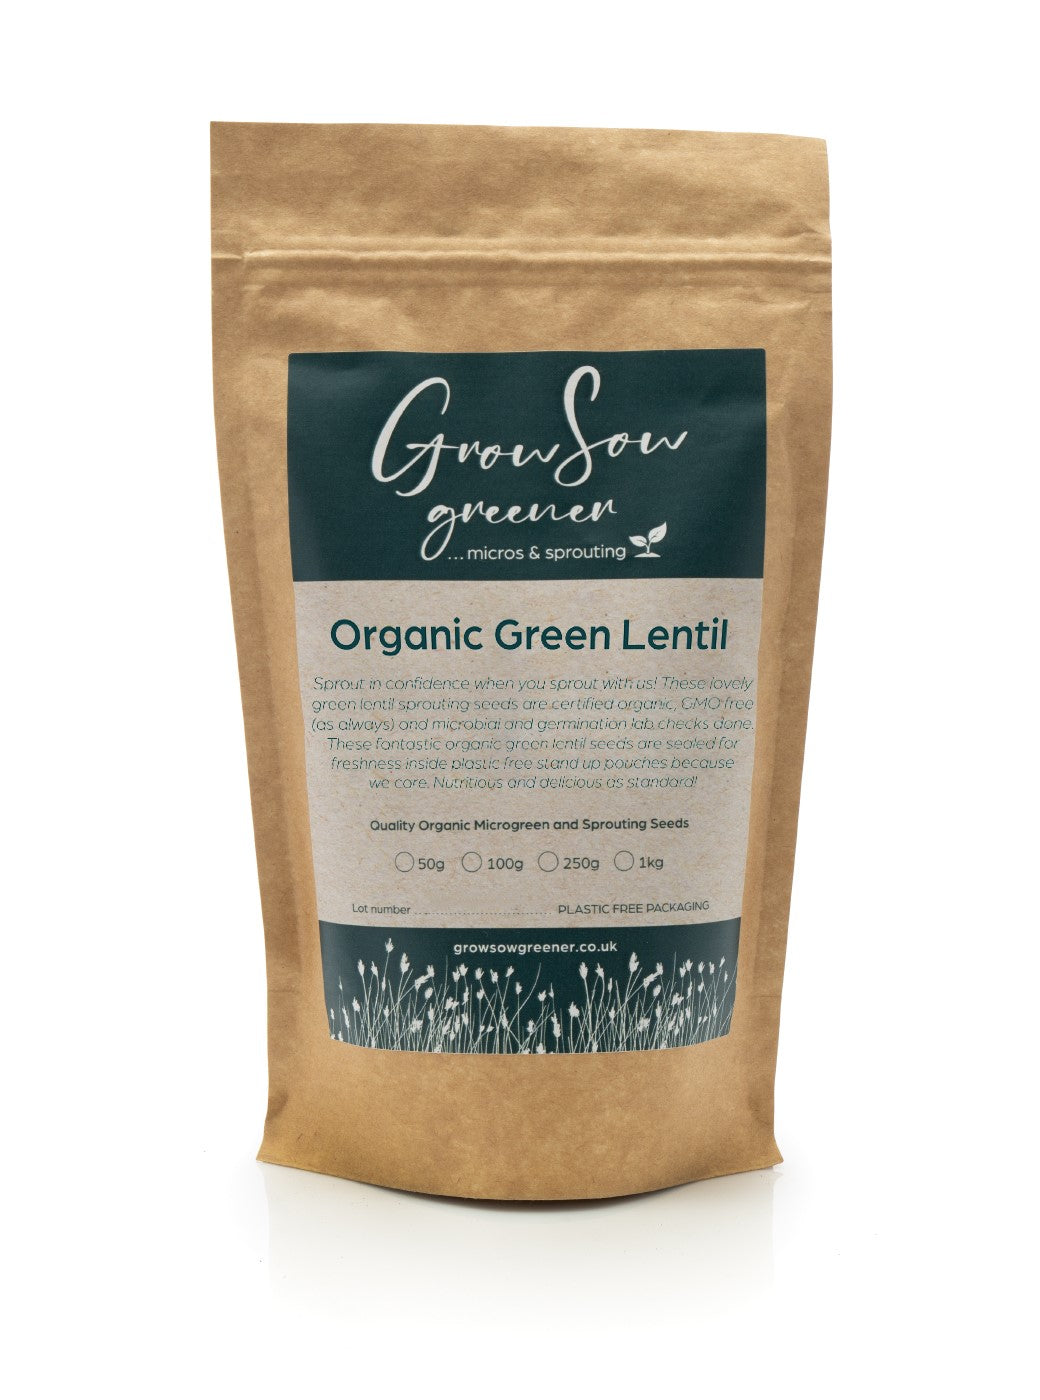 Organic Green Lentil Sprouting Seeds